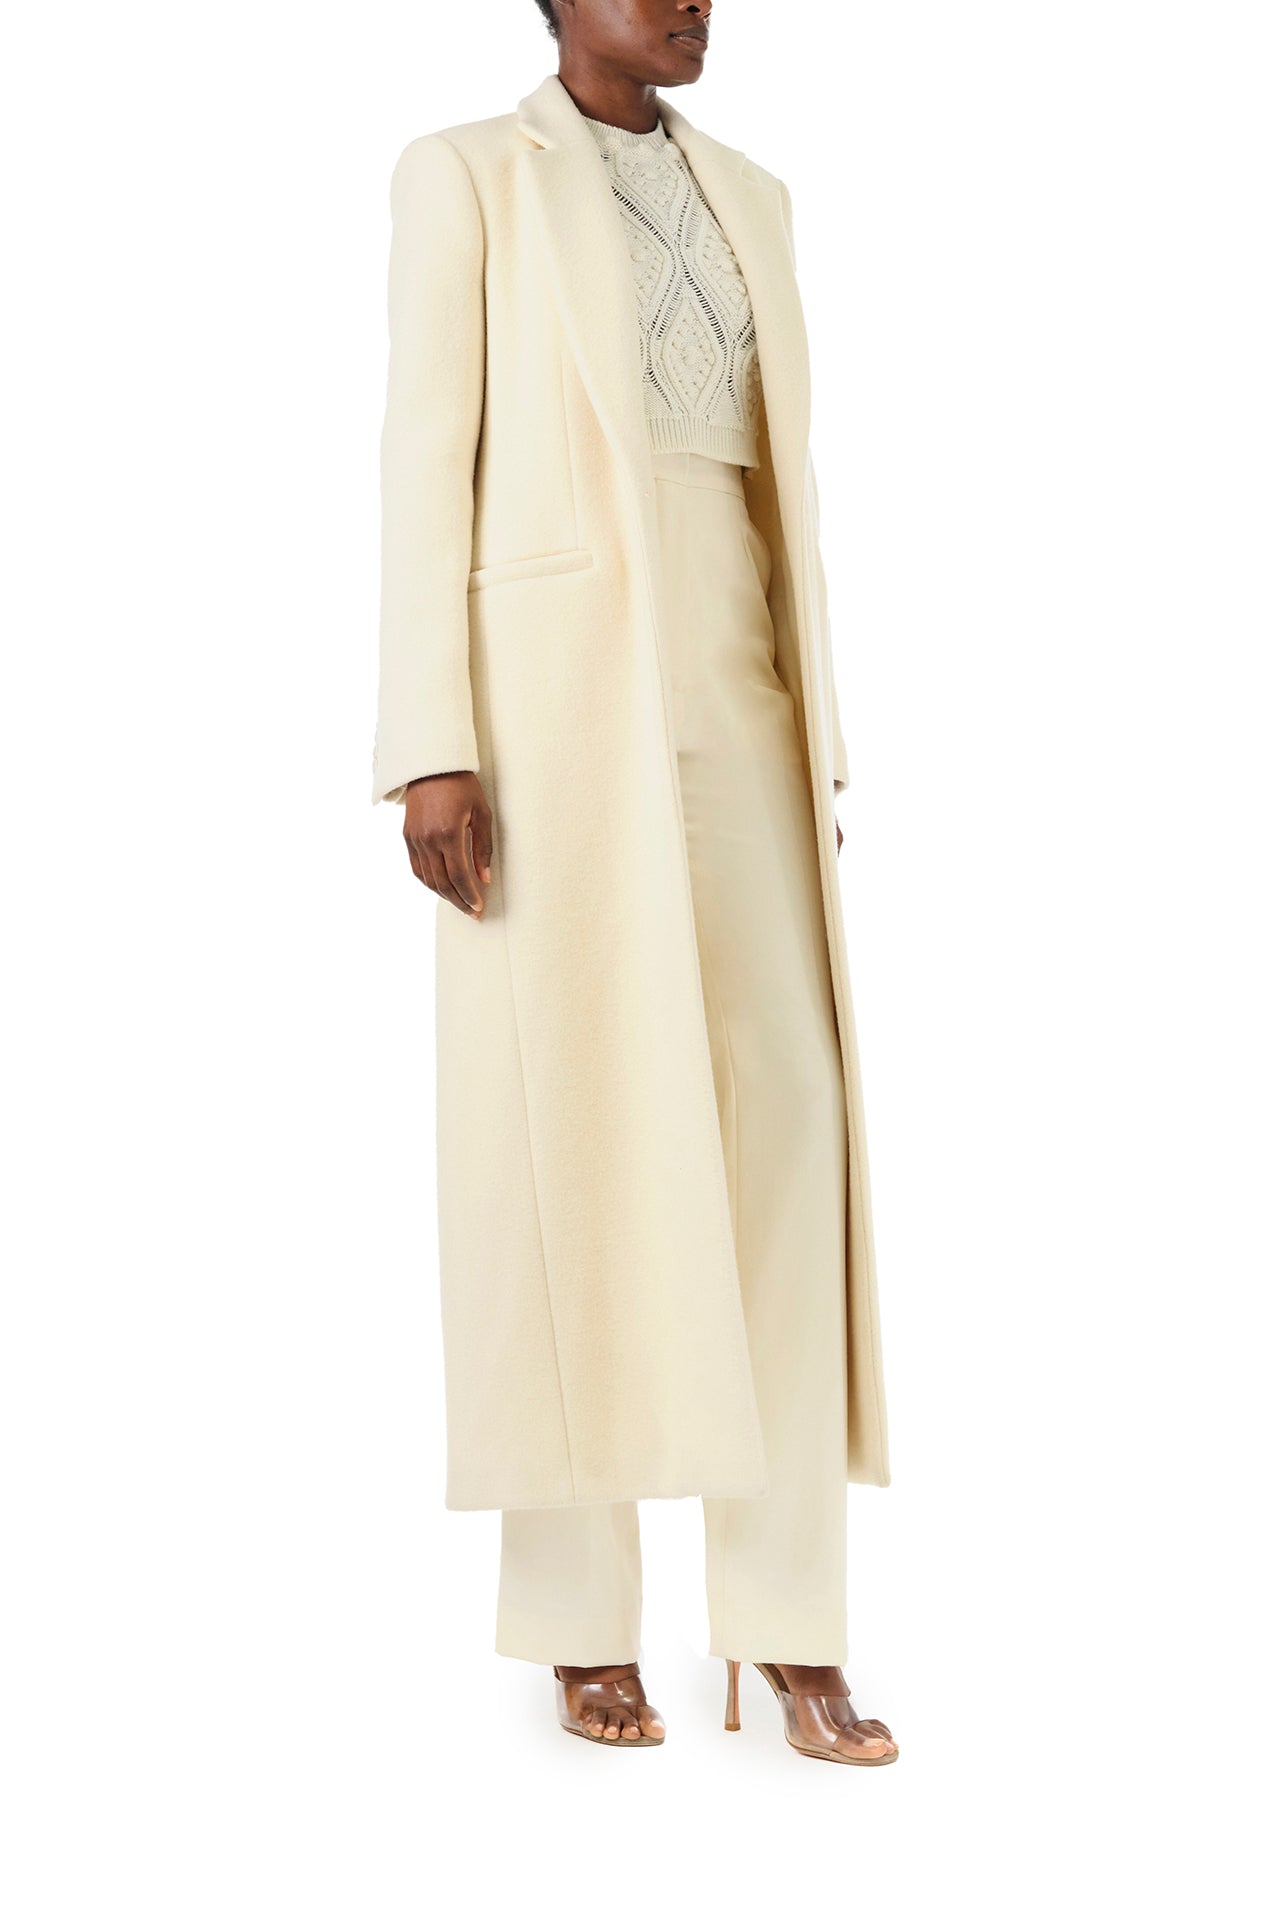 Monique Lhuillier Fall 2024 long sleeve coat in creme colored wool and single closure button - right side.